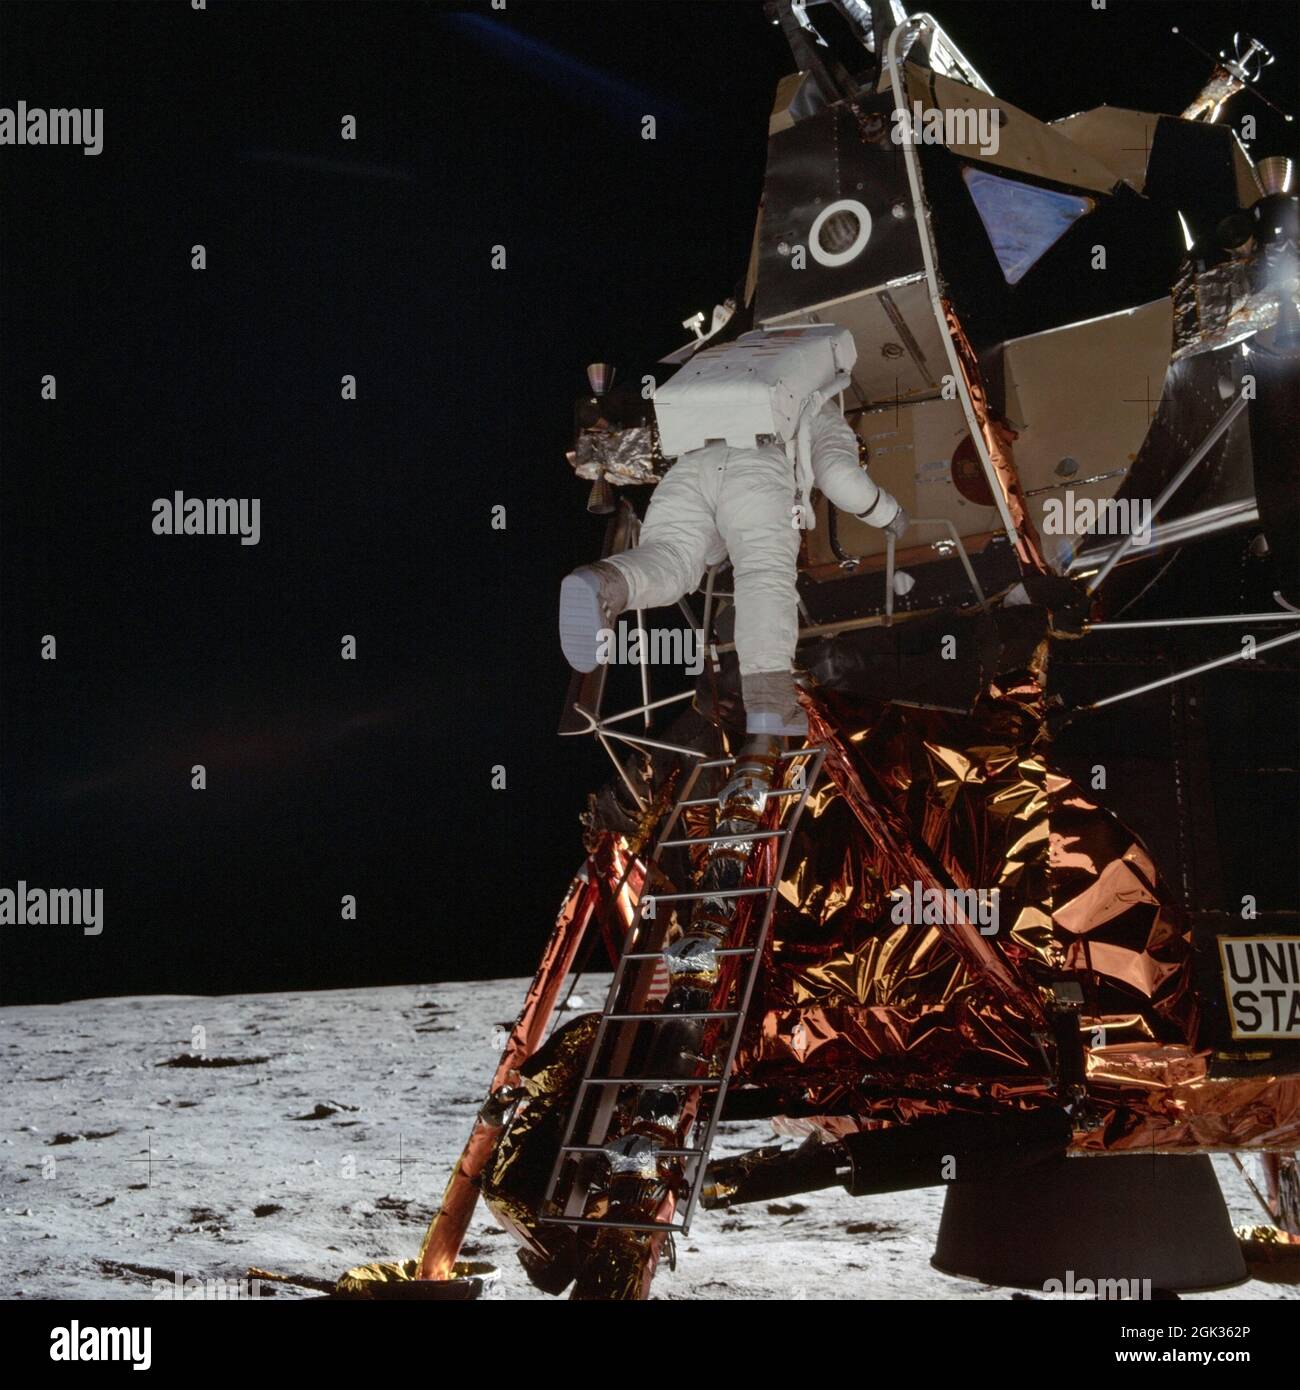 Astronaut Edwin E Aldrin Jr, Lunar Module (LM) pilot descends from the LM, climbing down the ladder. Lunar horizon visible in background.  Image taken at Tranquility Base during the Apollo 11 Mission. Original film magazine was labeled S.  Film Type: Ektachrome EF SO168 color film on a 2.7-mil Estar polyester base taken with a 60mm lens. Sun angle is Medium. Tilt direction is Northeast (NE). Stock Photo